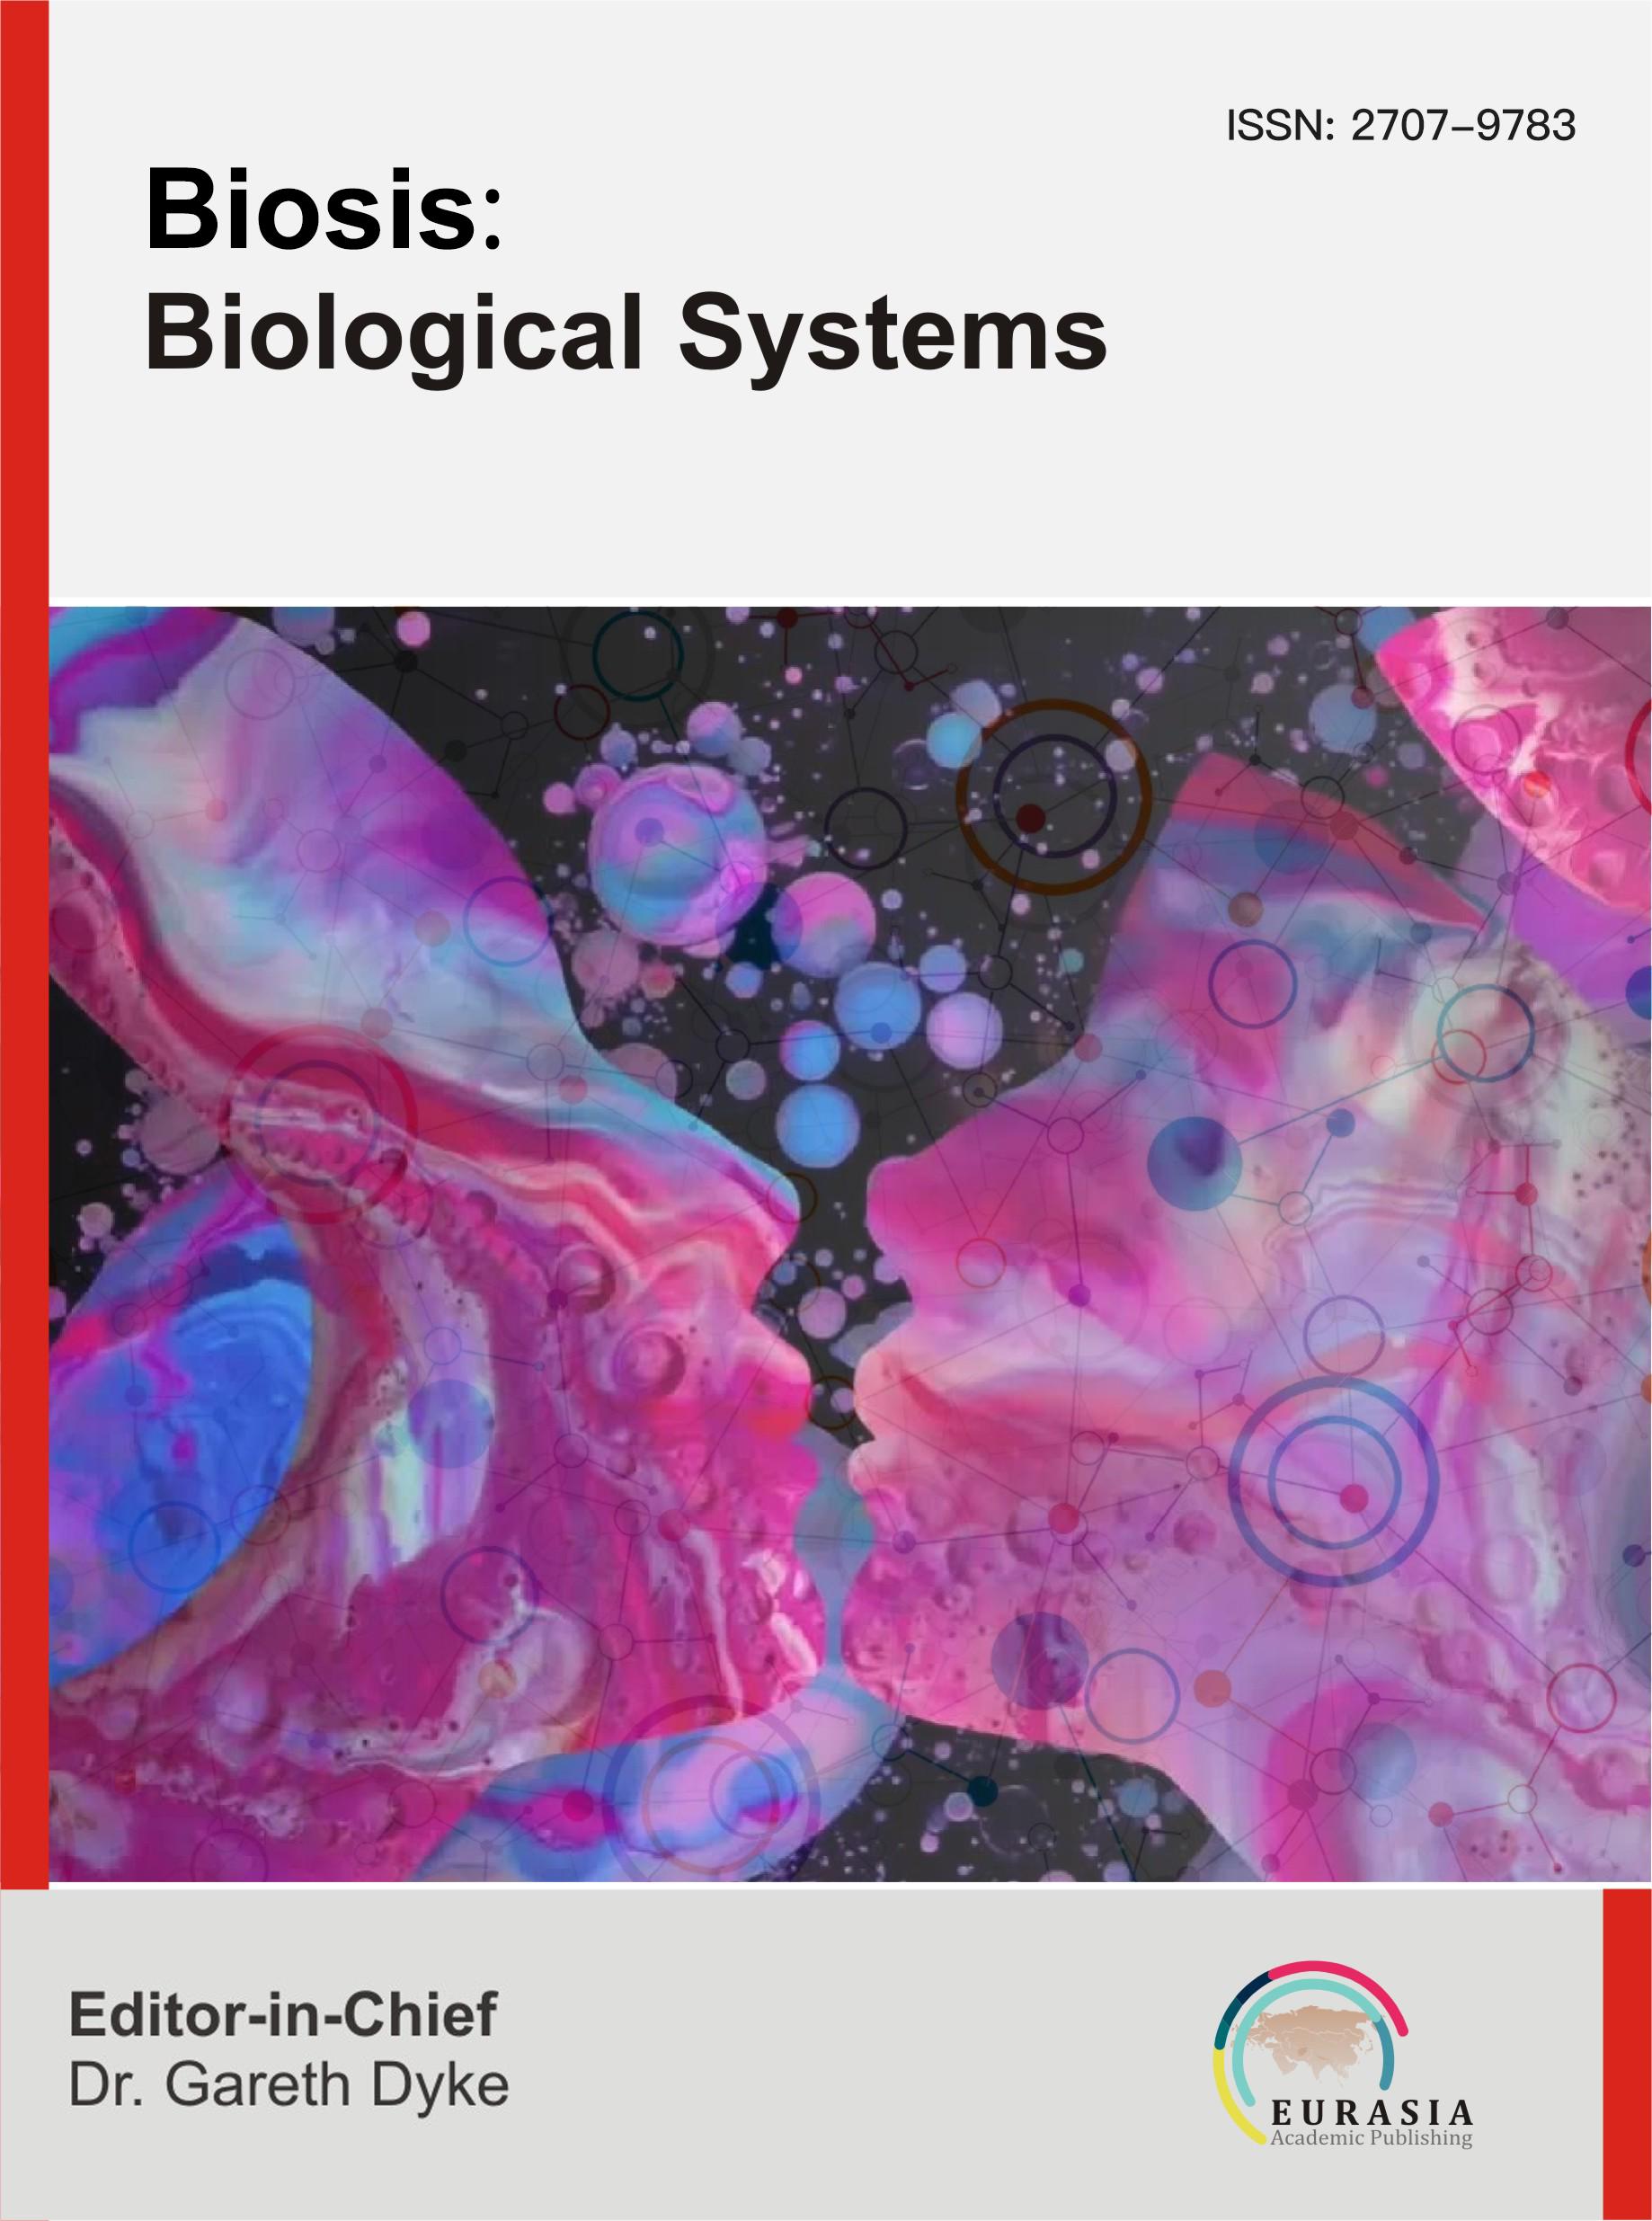 					View Vol. 2 No. 3 (2021): Biosis: Biological Systems
				